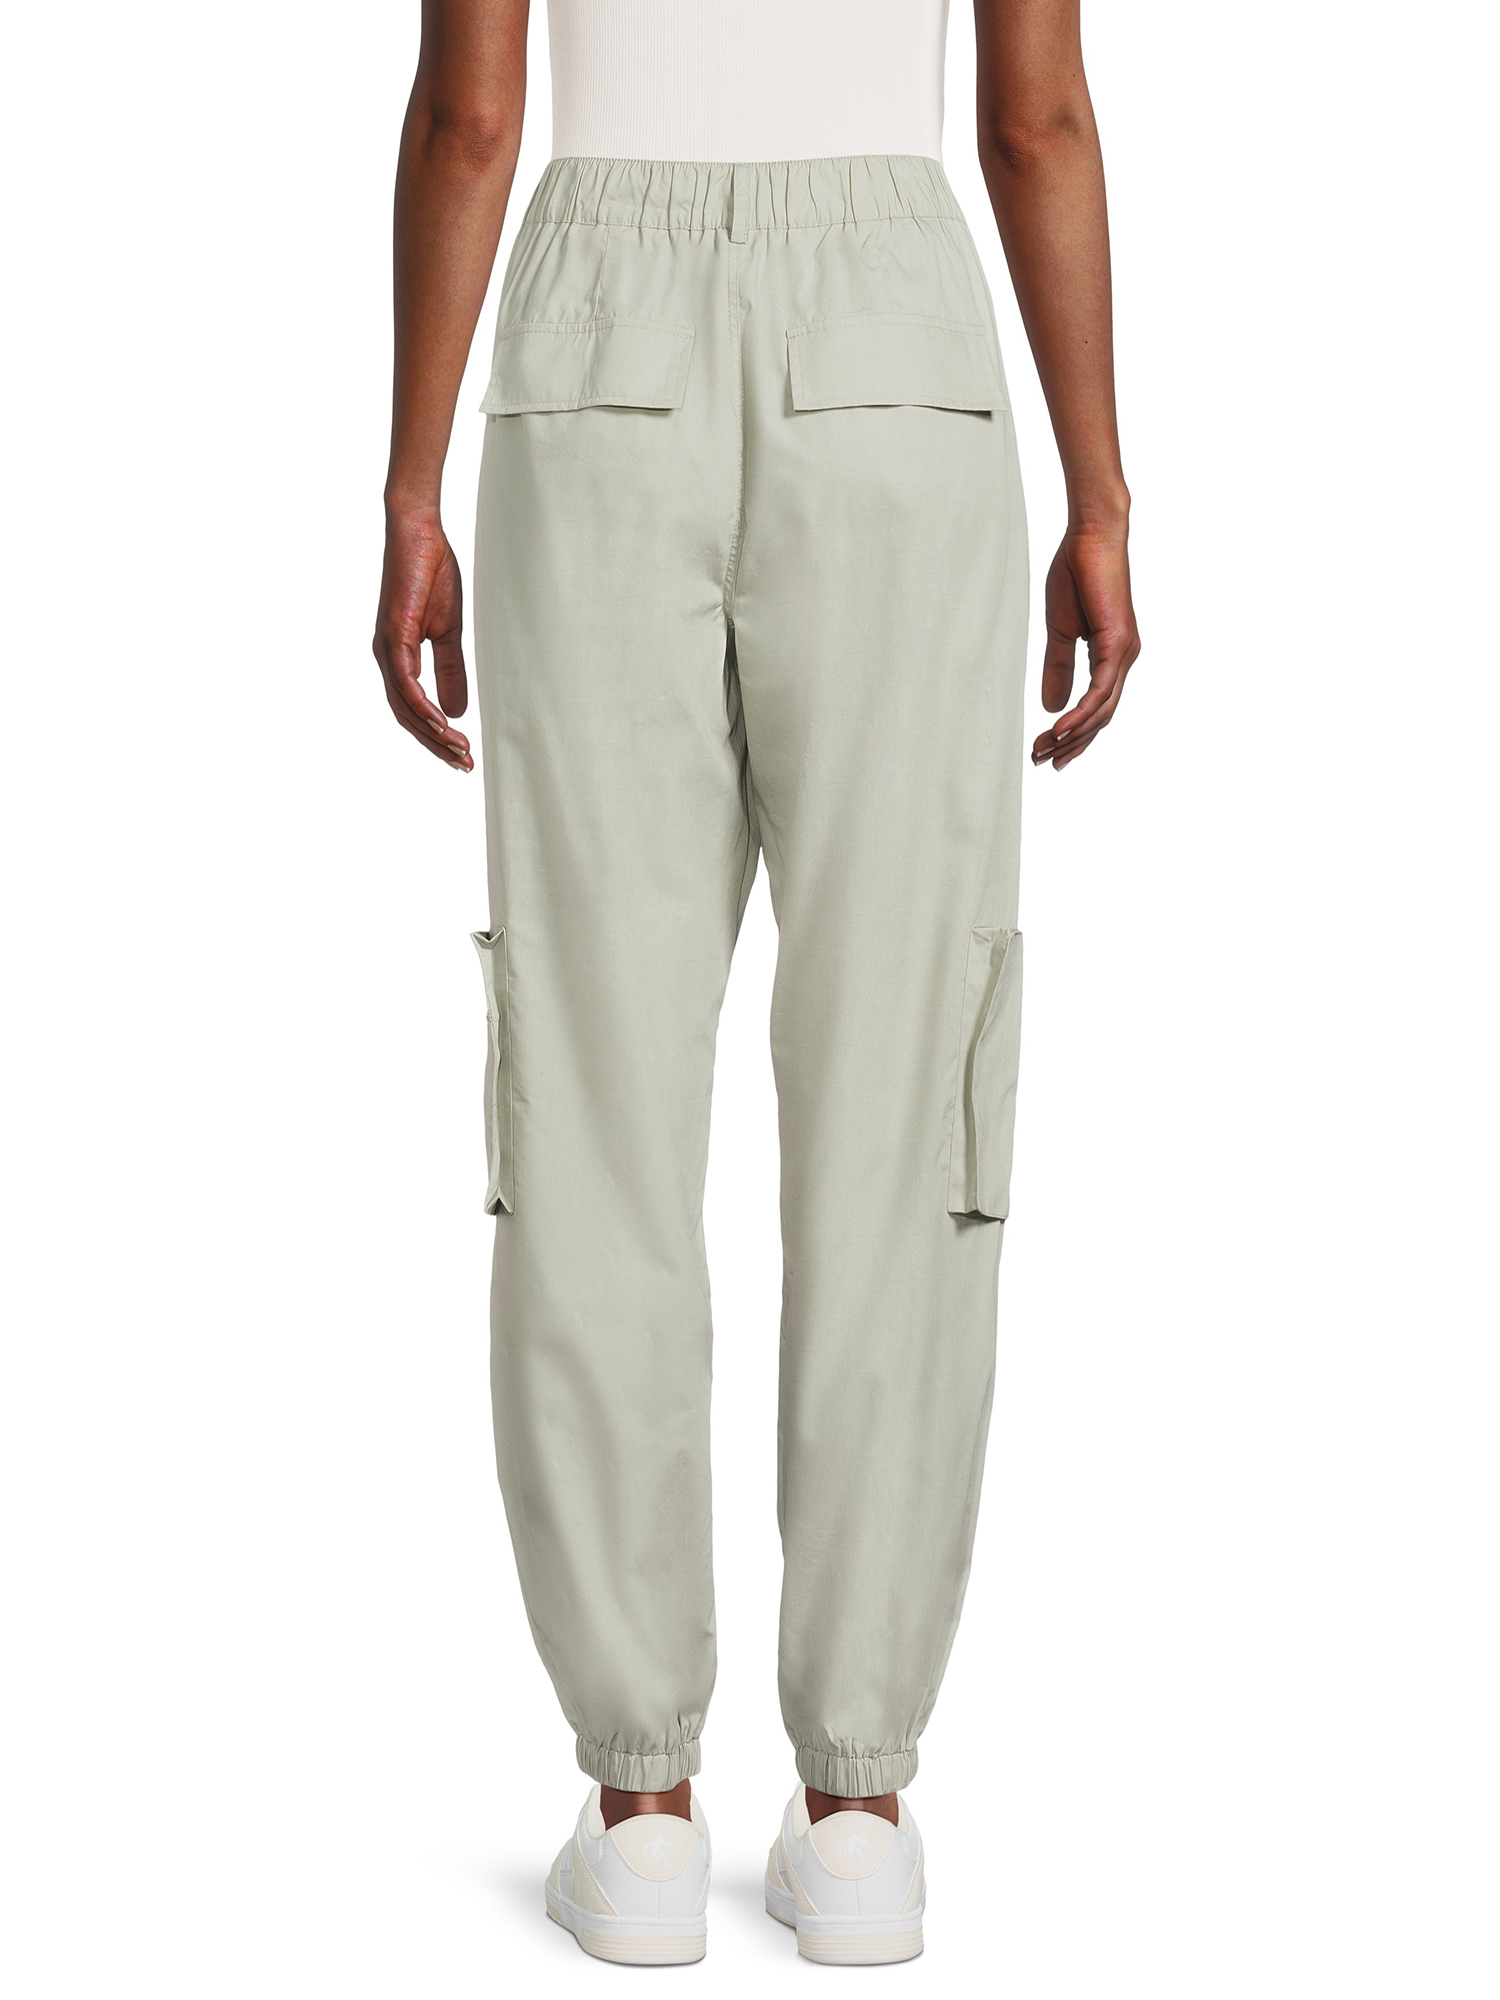 Liv & Lottie Juniors Cargo Pants with Zippers, Sizes S-XL - image 3 of 5